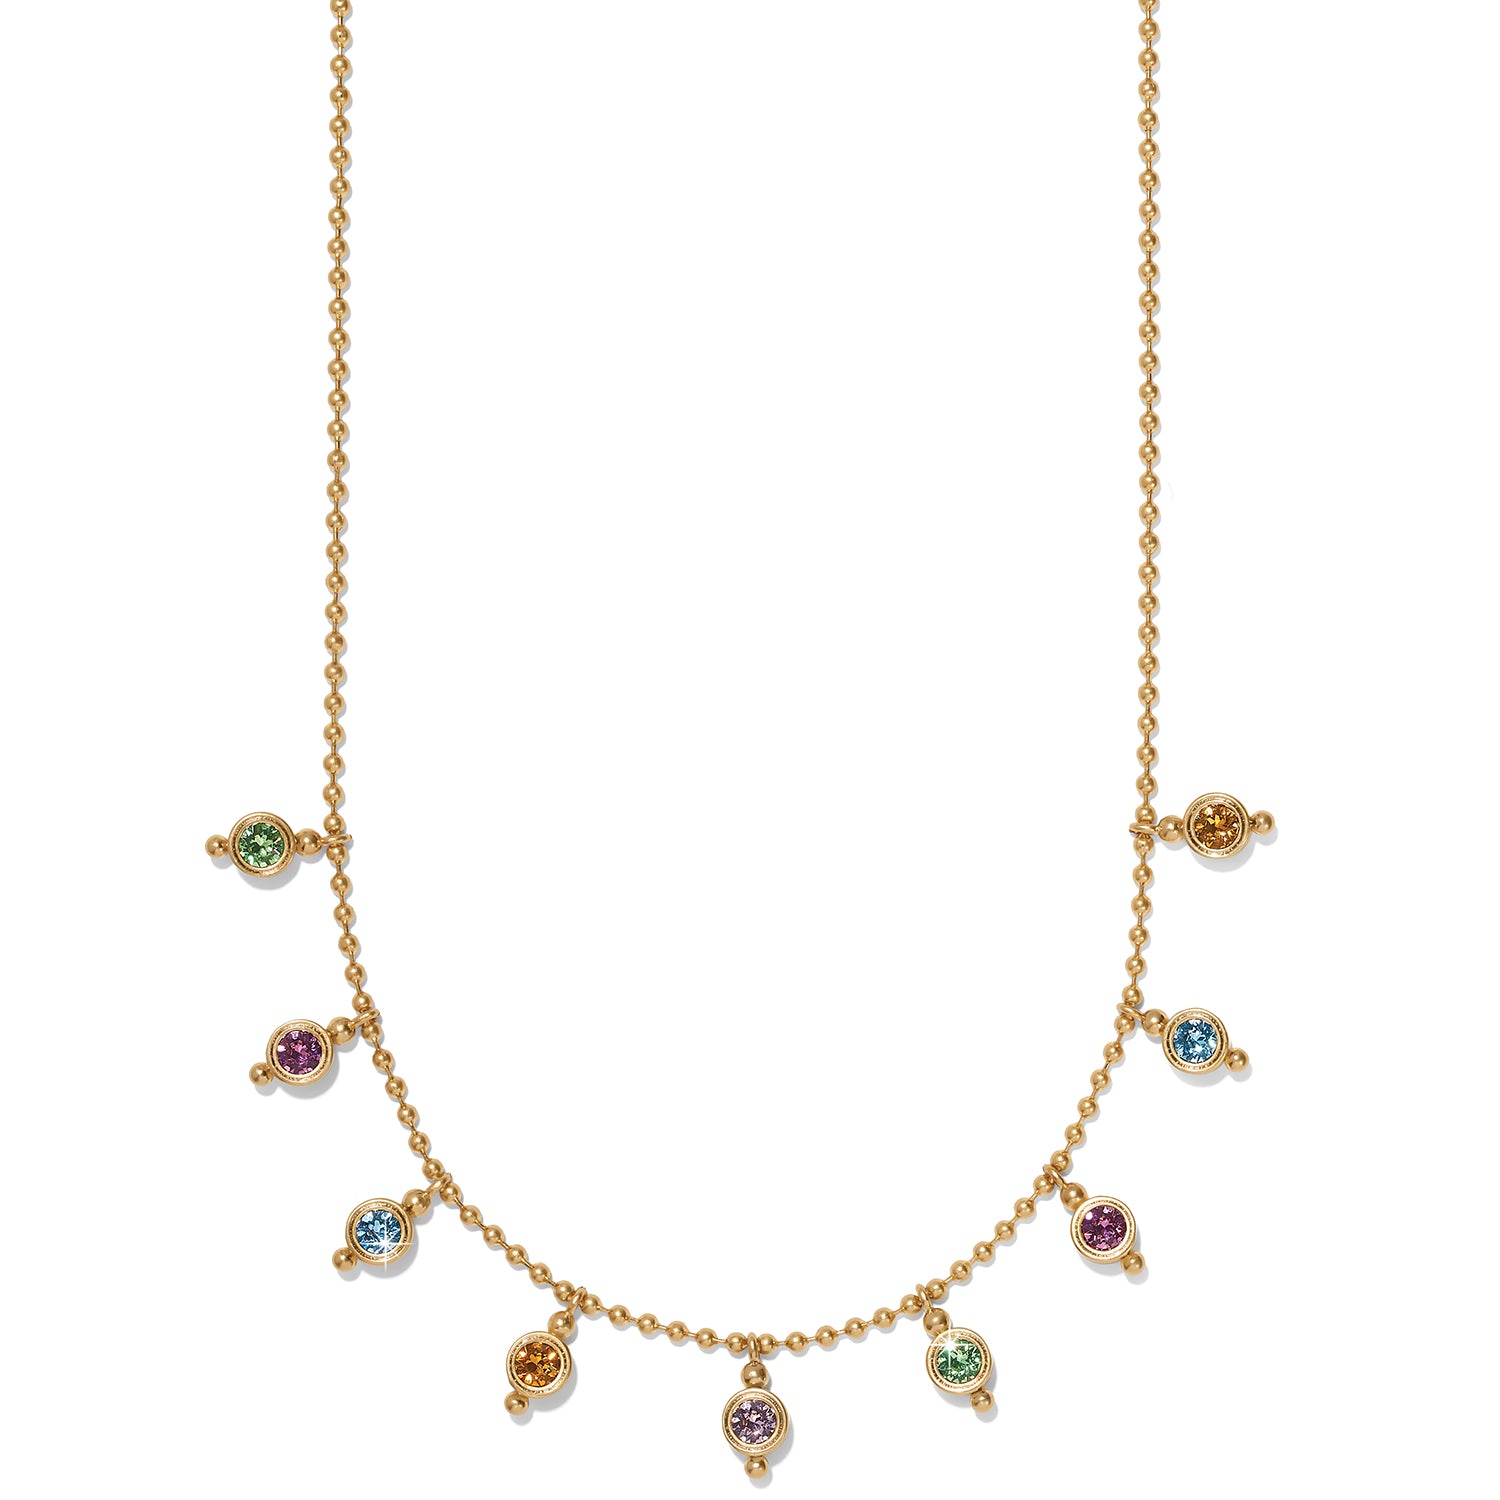 Brighton Twinkle Mod Droplet Reversible Necklace